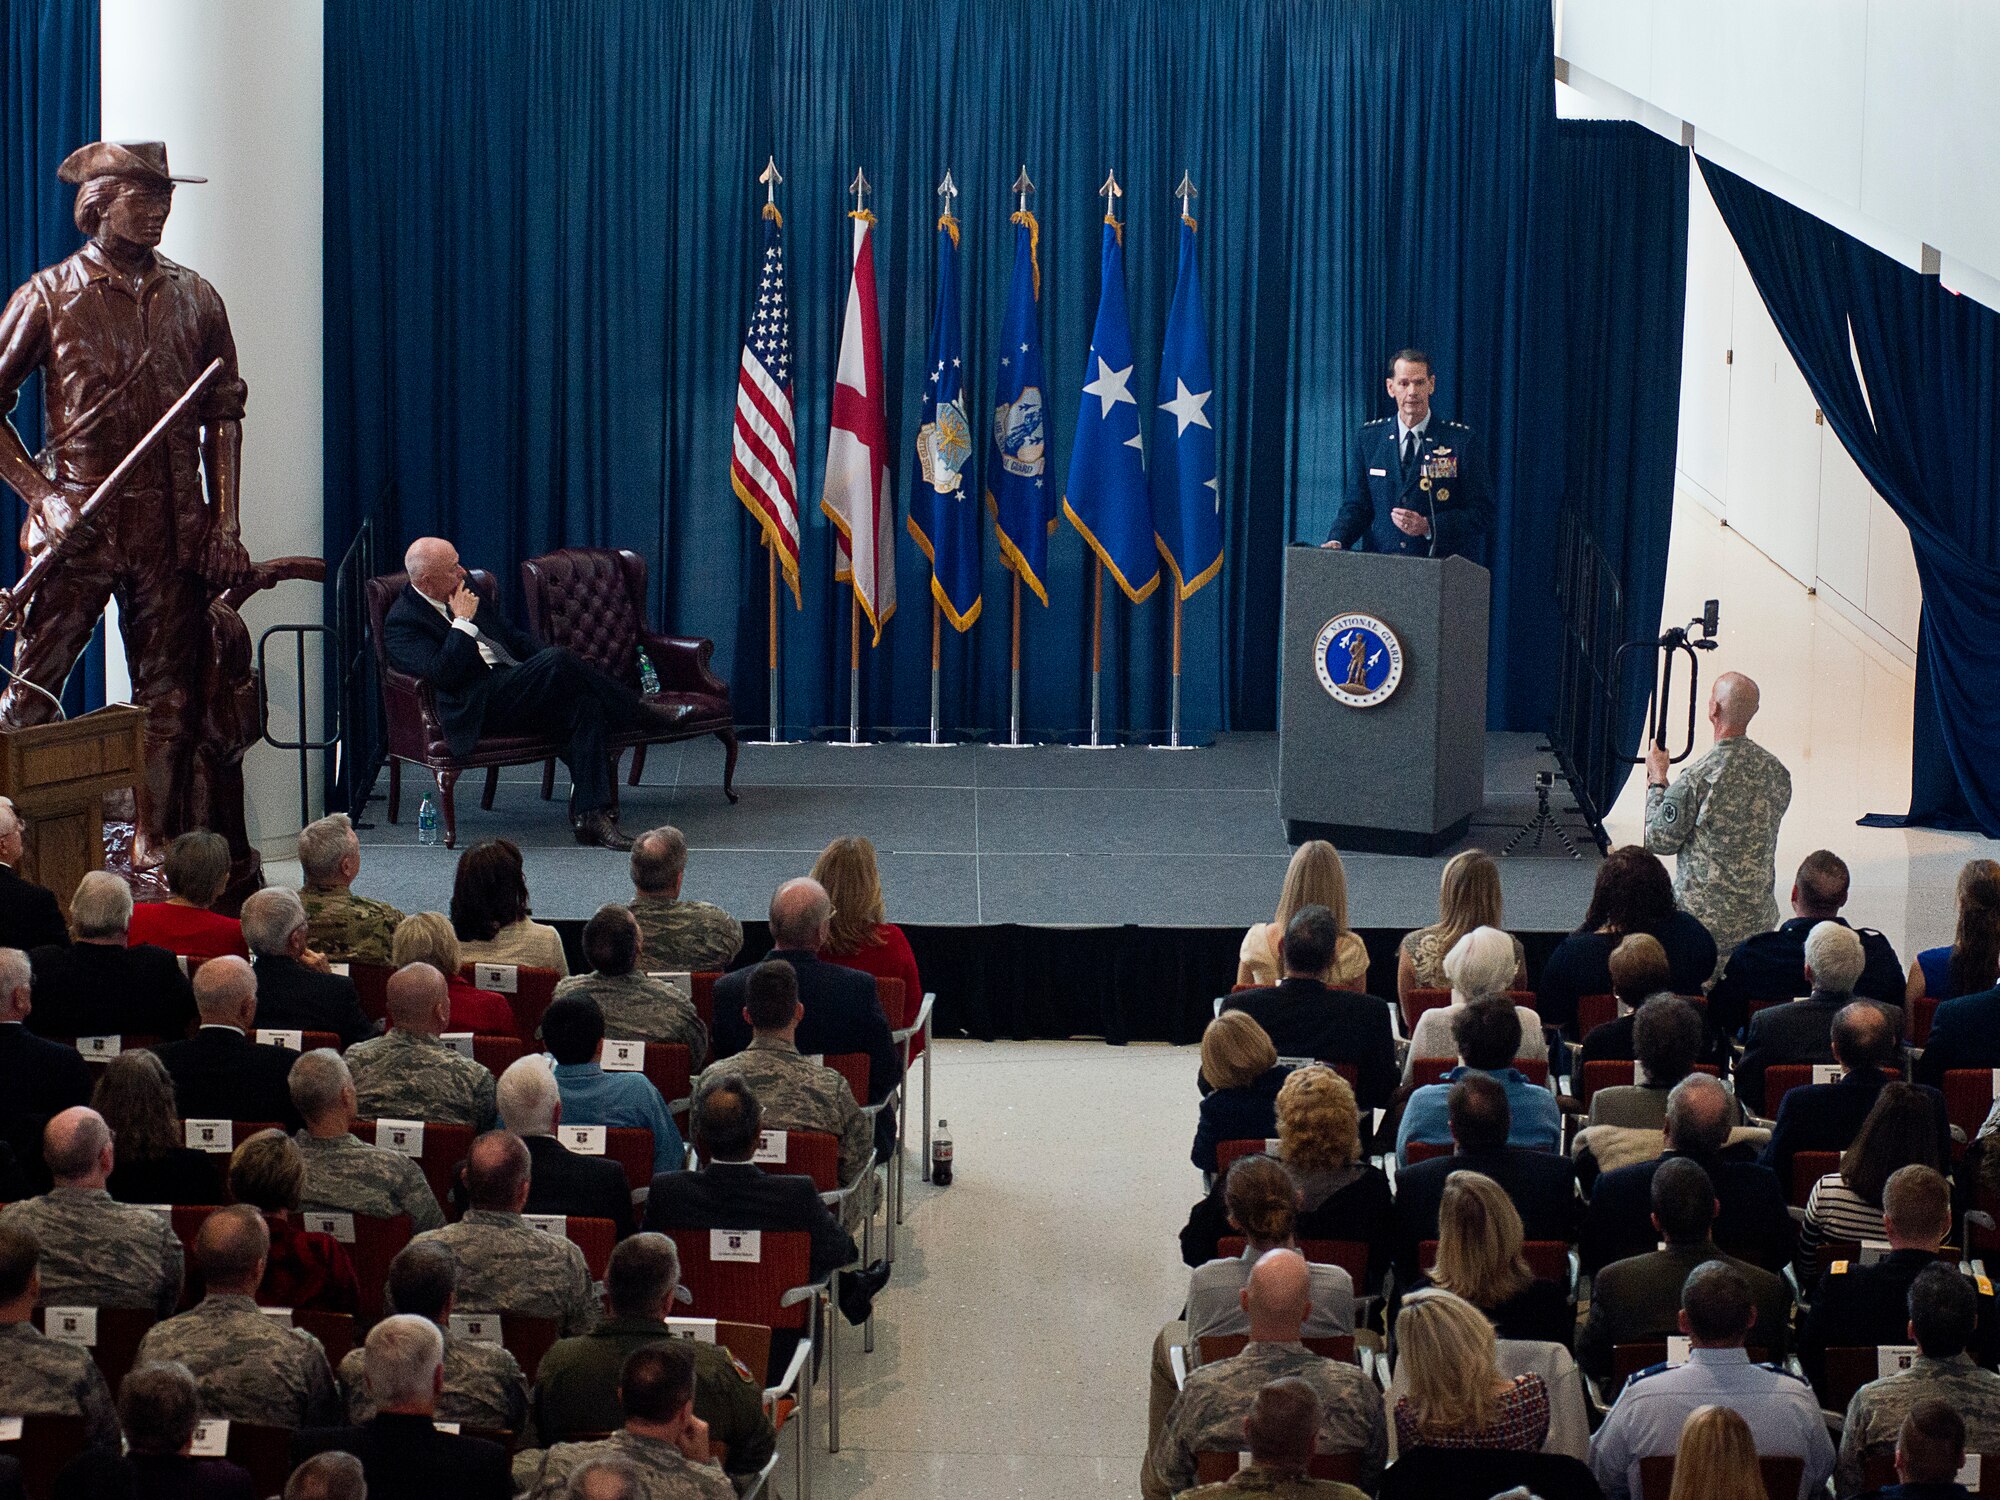 Lt. Gen. Stanley E. Clarke, III, Air National Guard director, delivers remarks during his retirement ceremony held at the Air National Guard Readiness Center on Joint Base Andrews, Md., December 18, 2015. Clarke is the 15th ANG director, and has served in that position since March, 2013. (U.S. Air National Guard photo by Staff Sgt. John E. Hillier/Released)